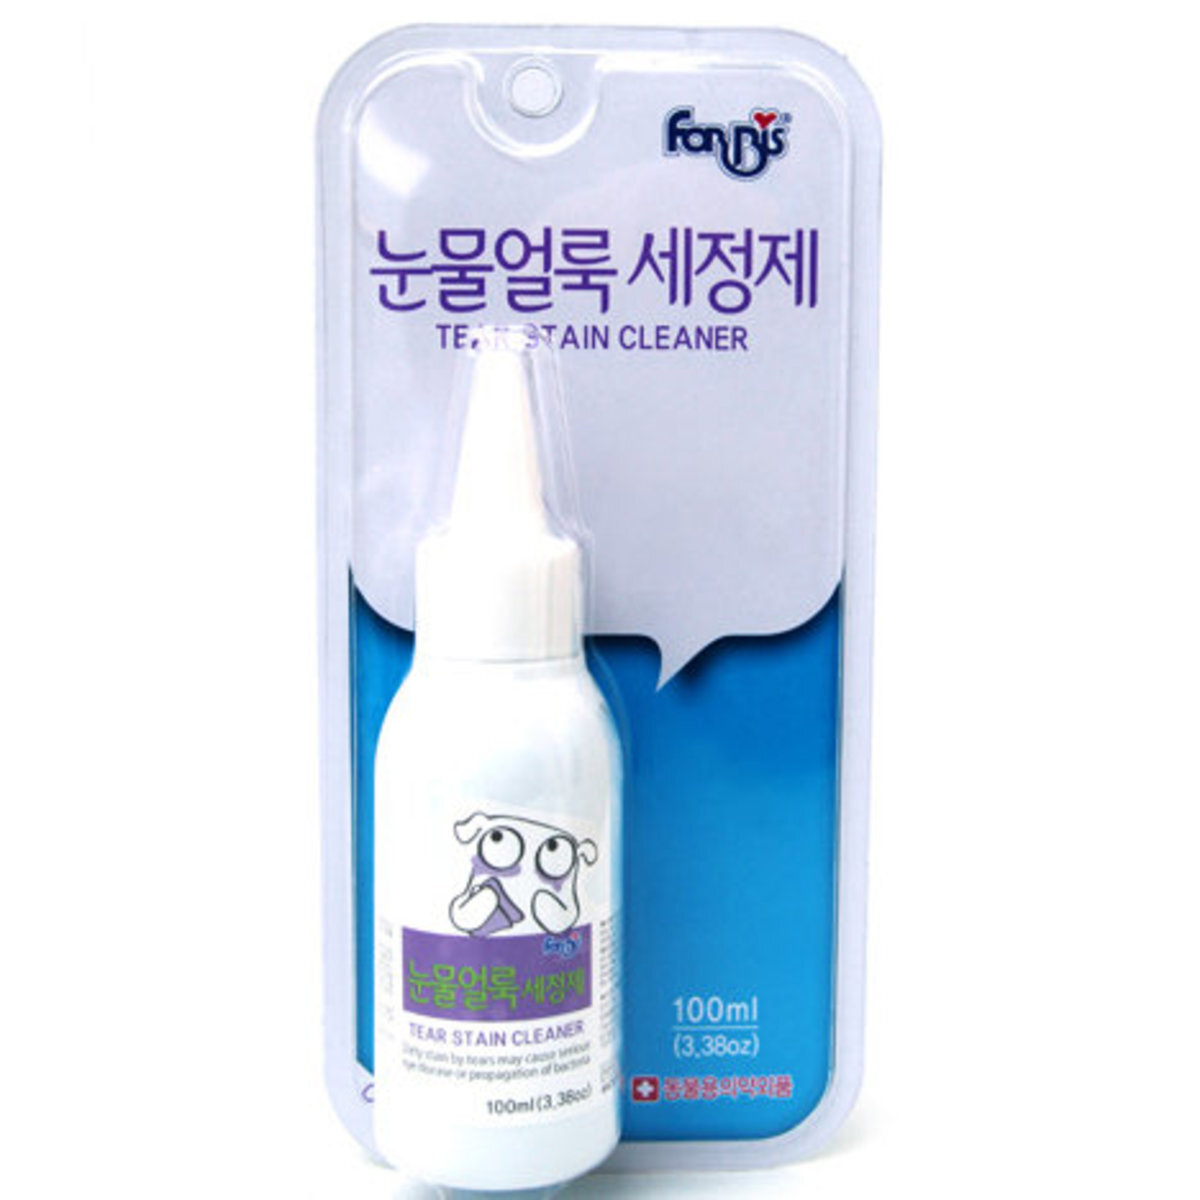 Tear Stain Cleaner for Cats and Dogs 100ML